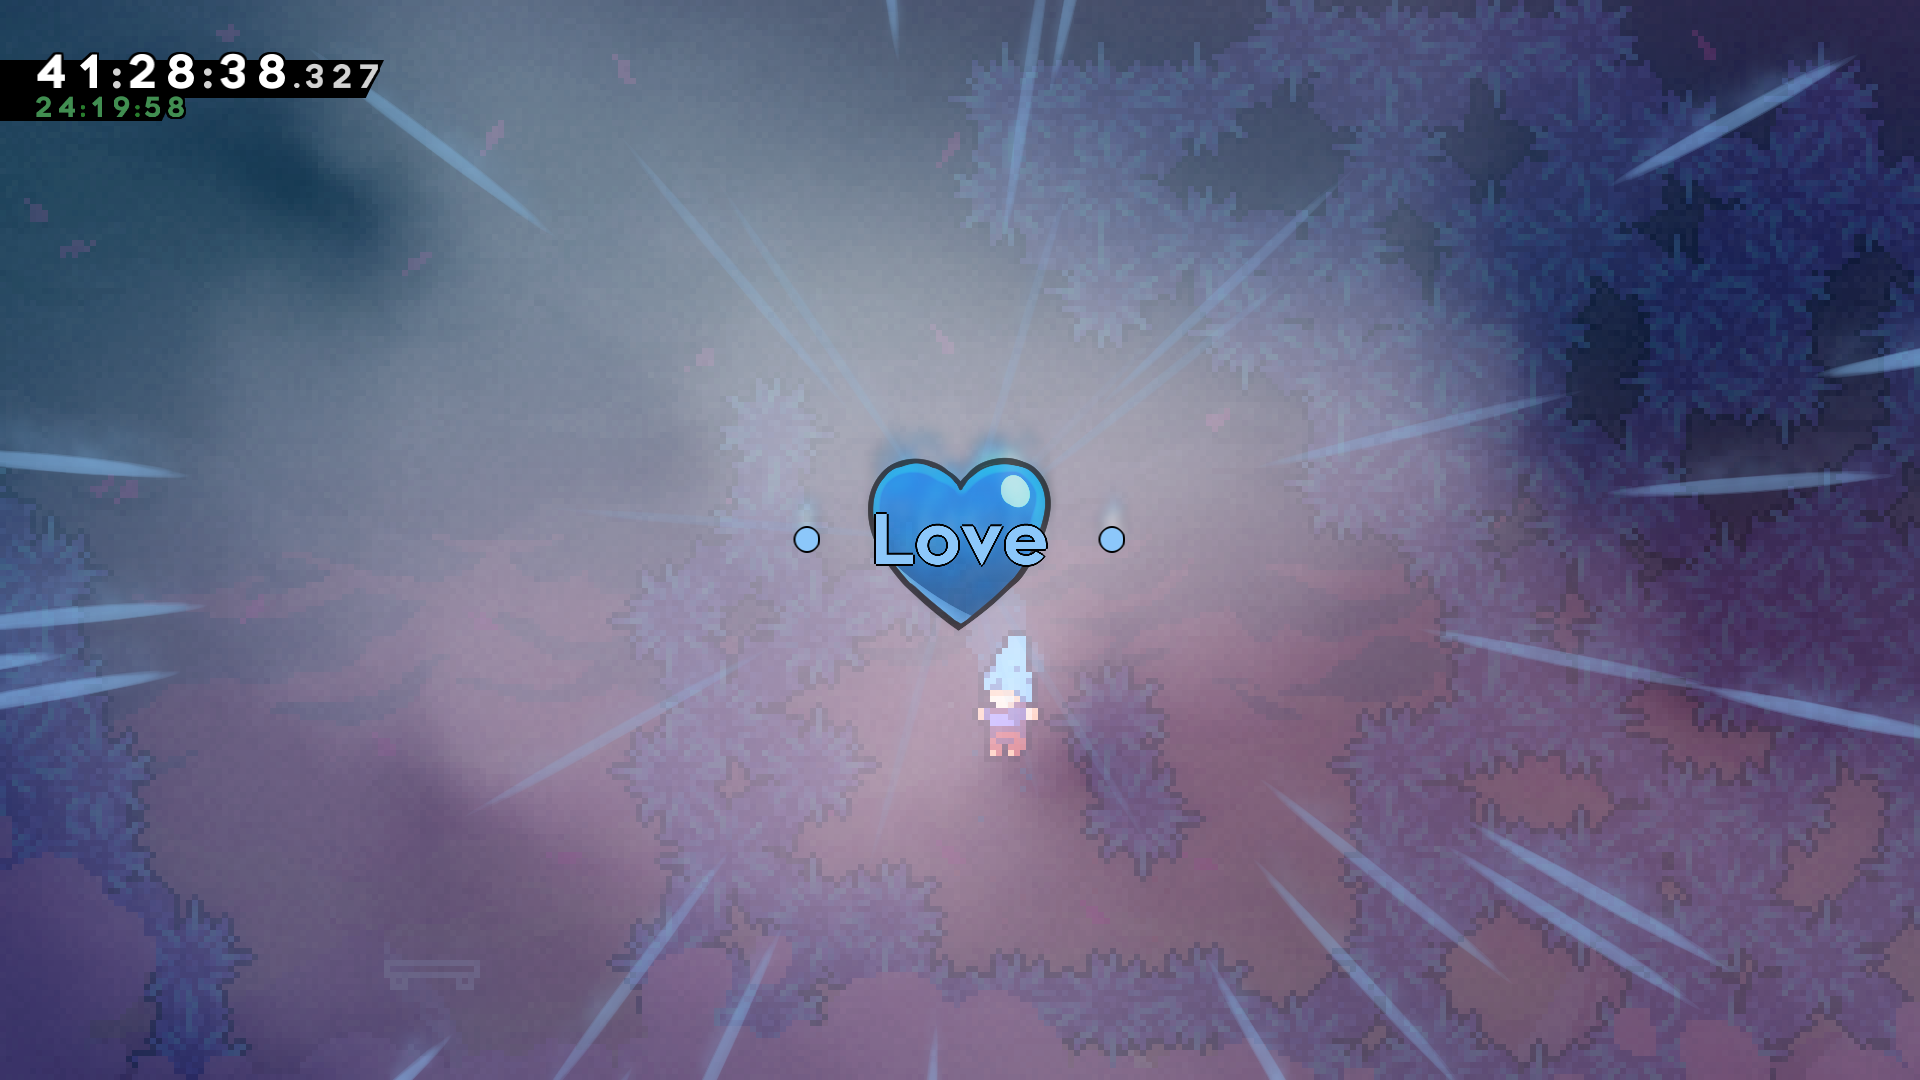 The end screen of chapter 7D, with the text &ldquo;Love&rdquo; in center.